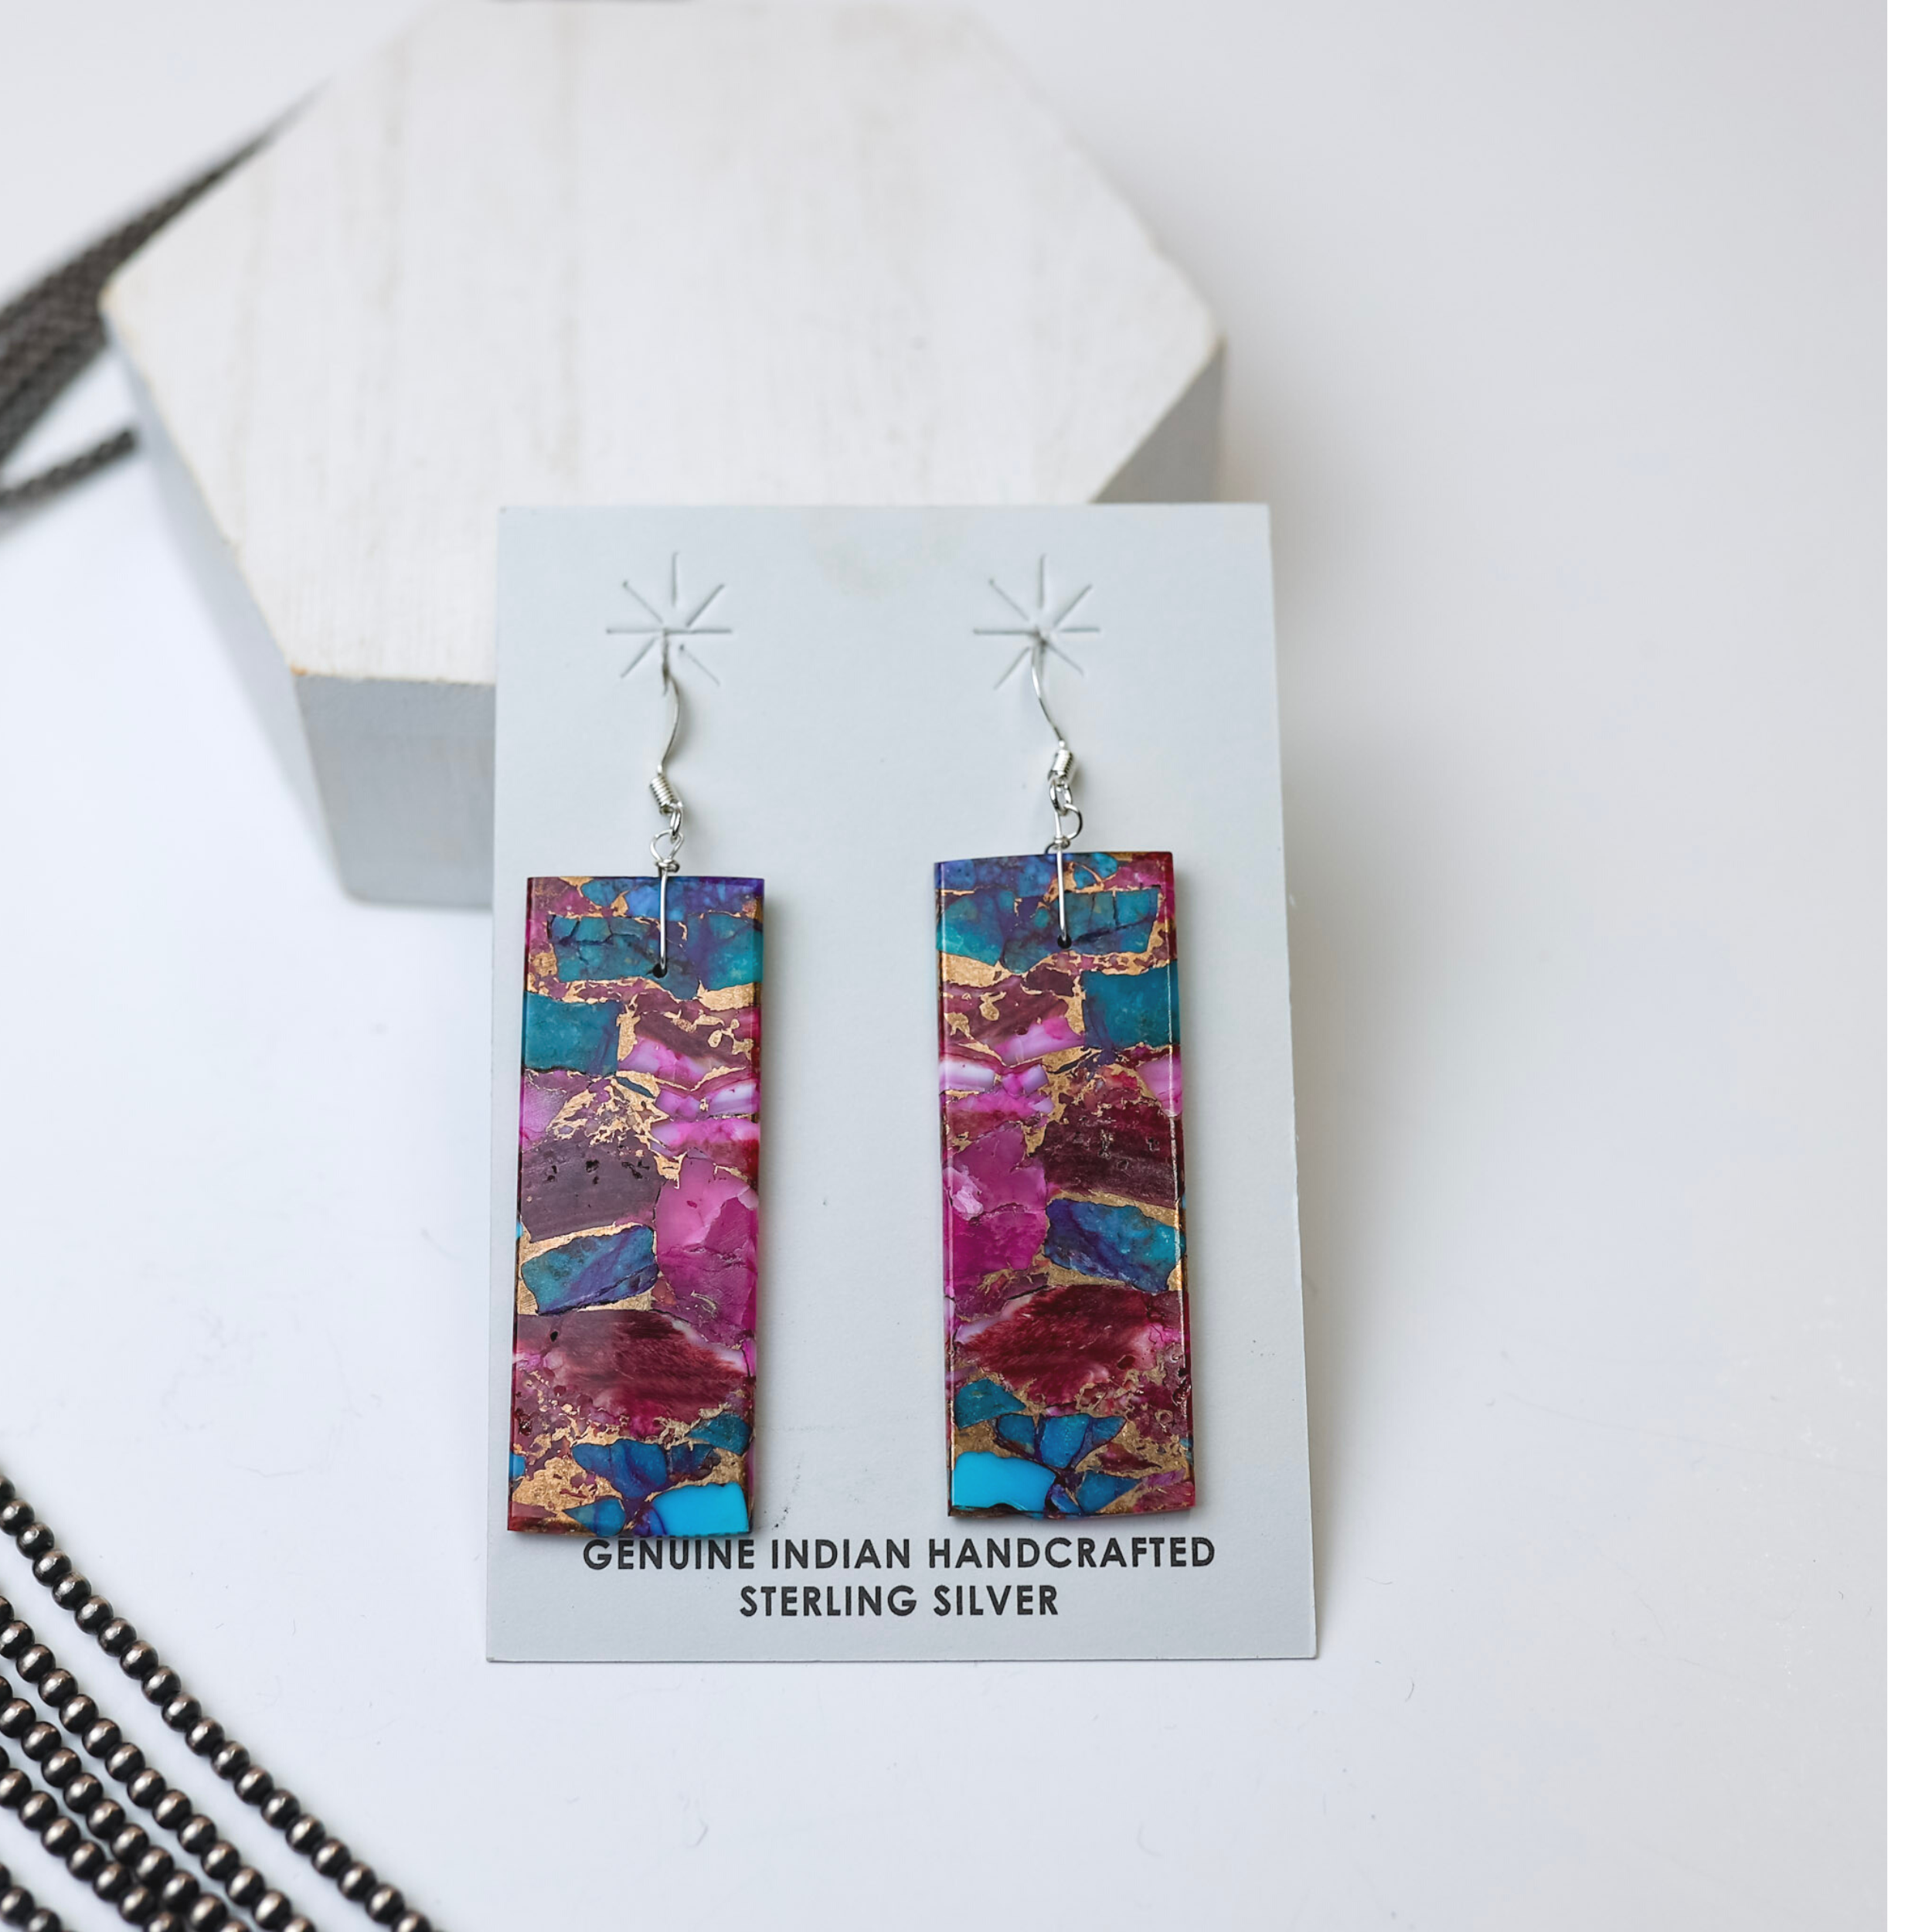 Corraine Smith Navajo Handmade Rectangle Purple Dahlia Remix Slab Earrings are centered in the picture with navajo pearls laid to the left of the earrings. All is on a white background. 